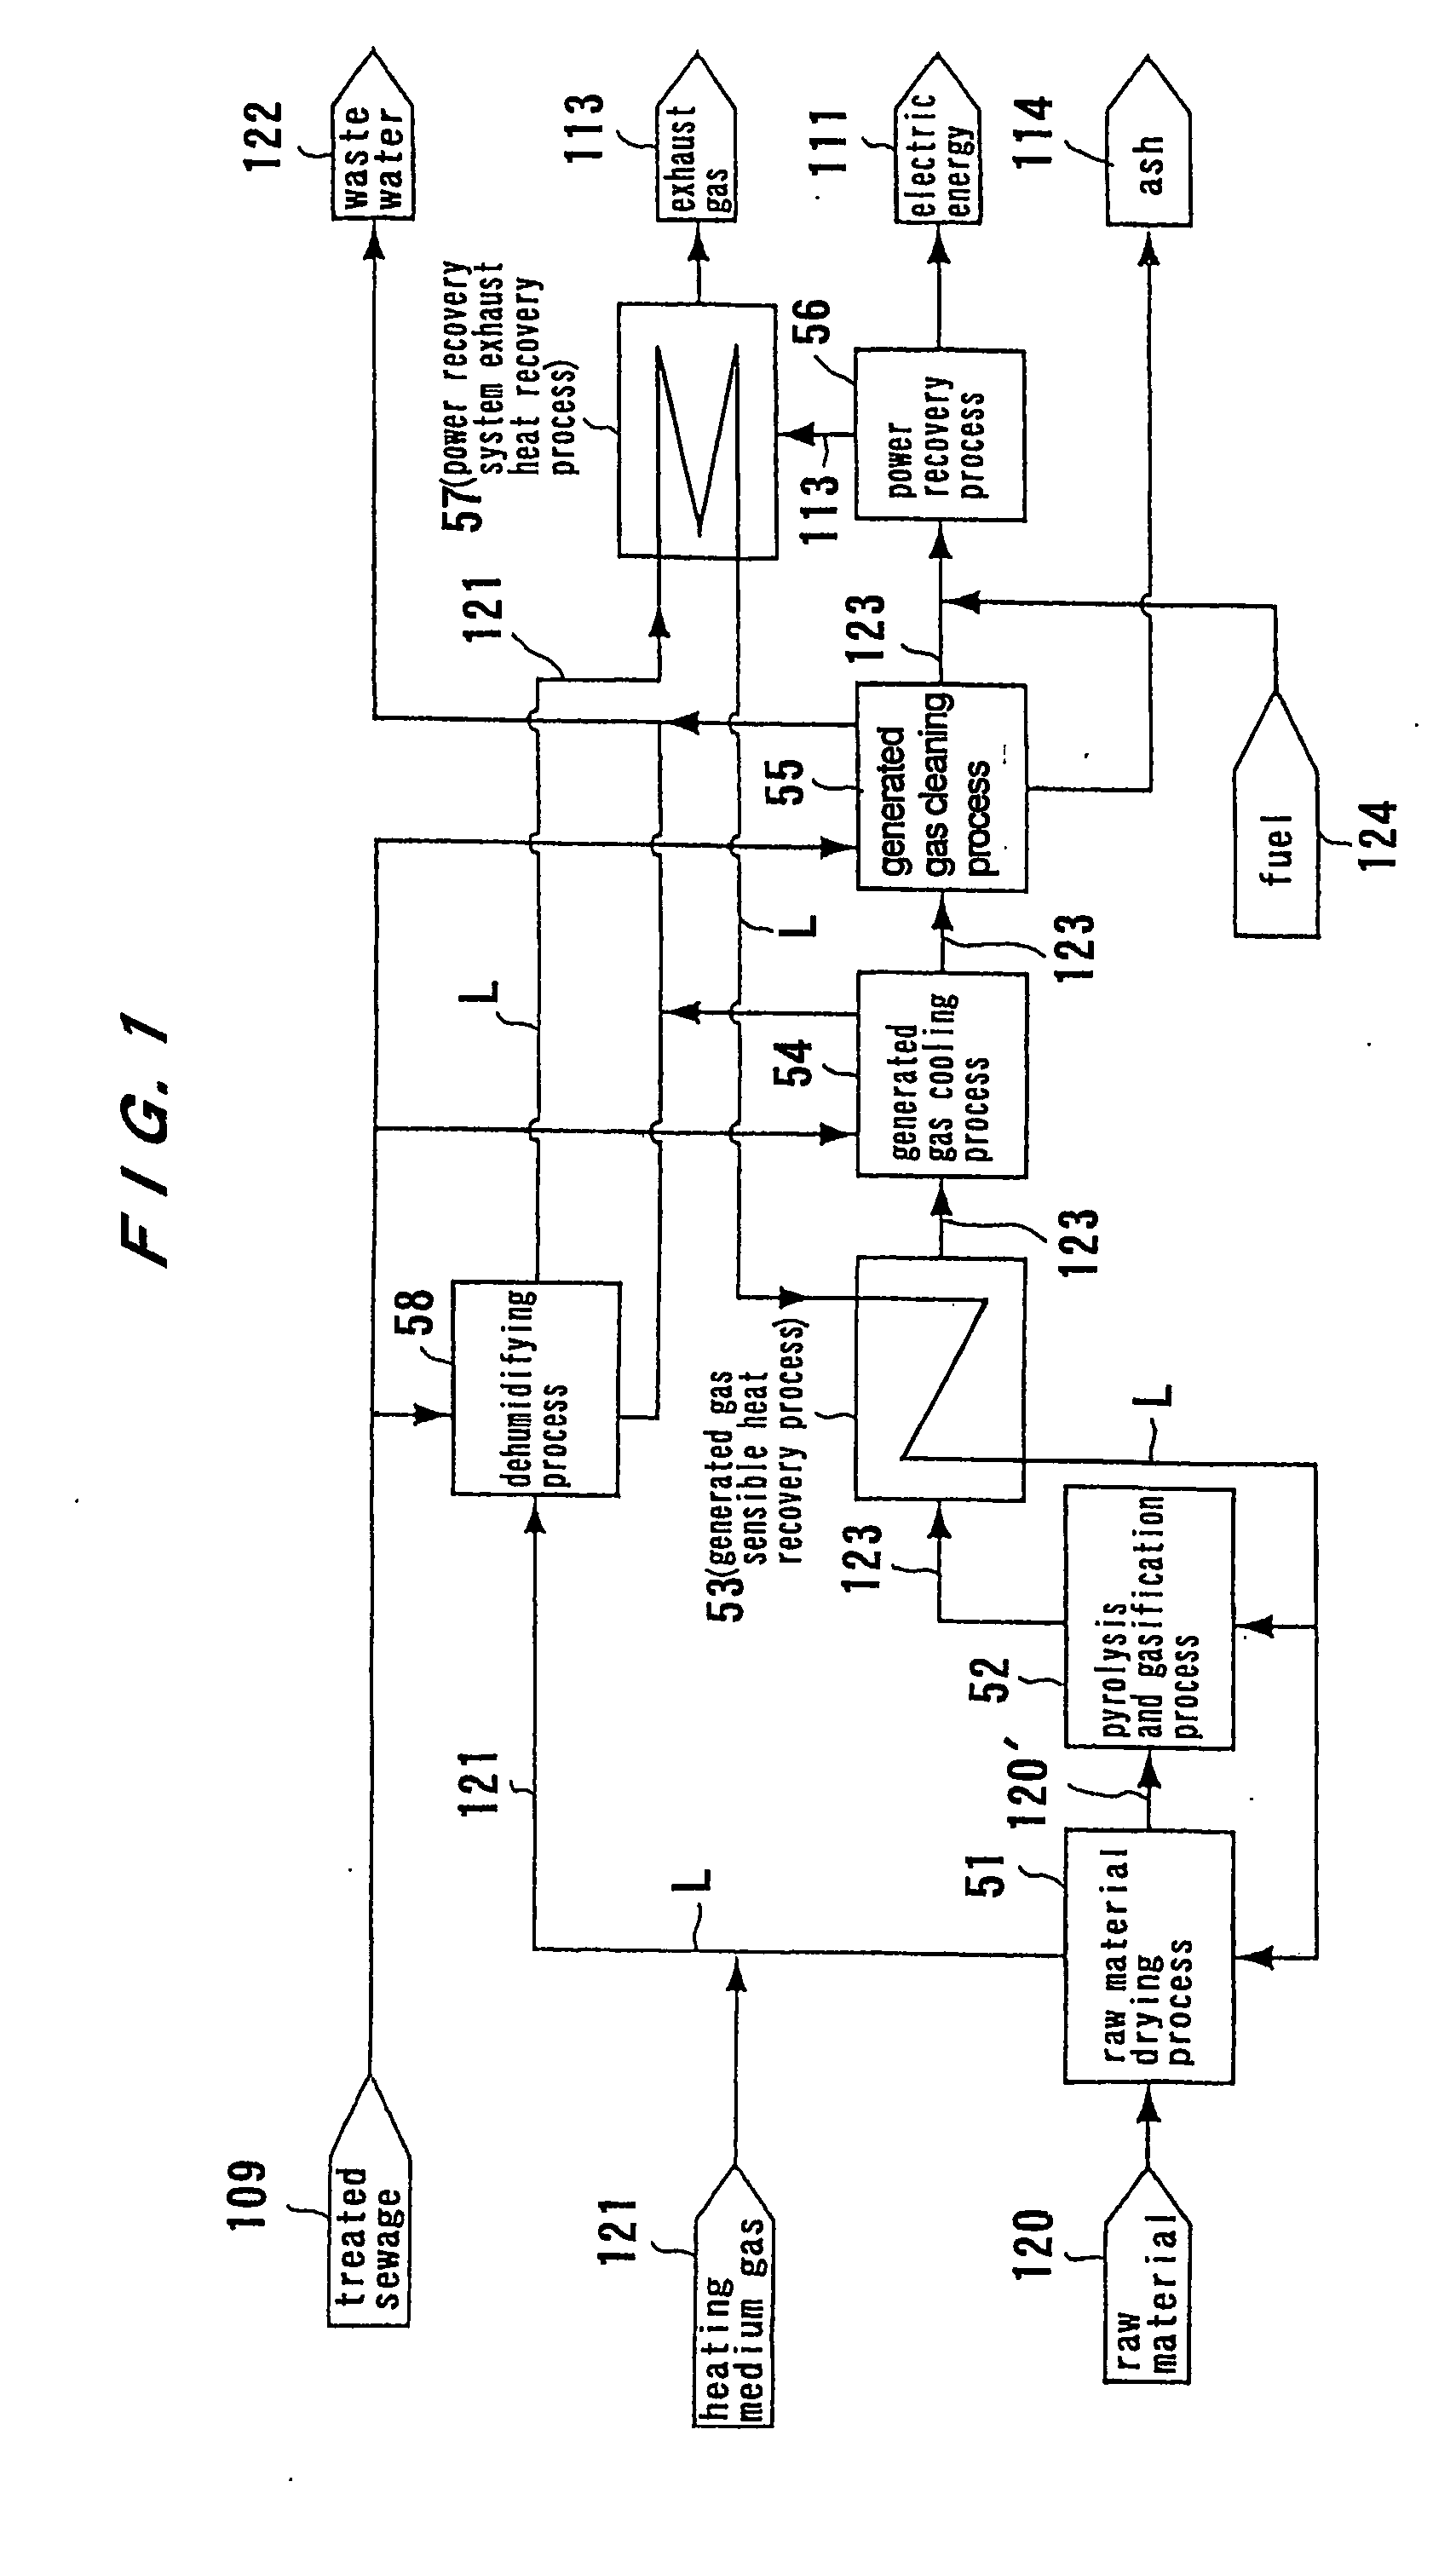 Method and apparatus for treating organic matter